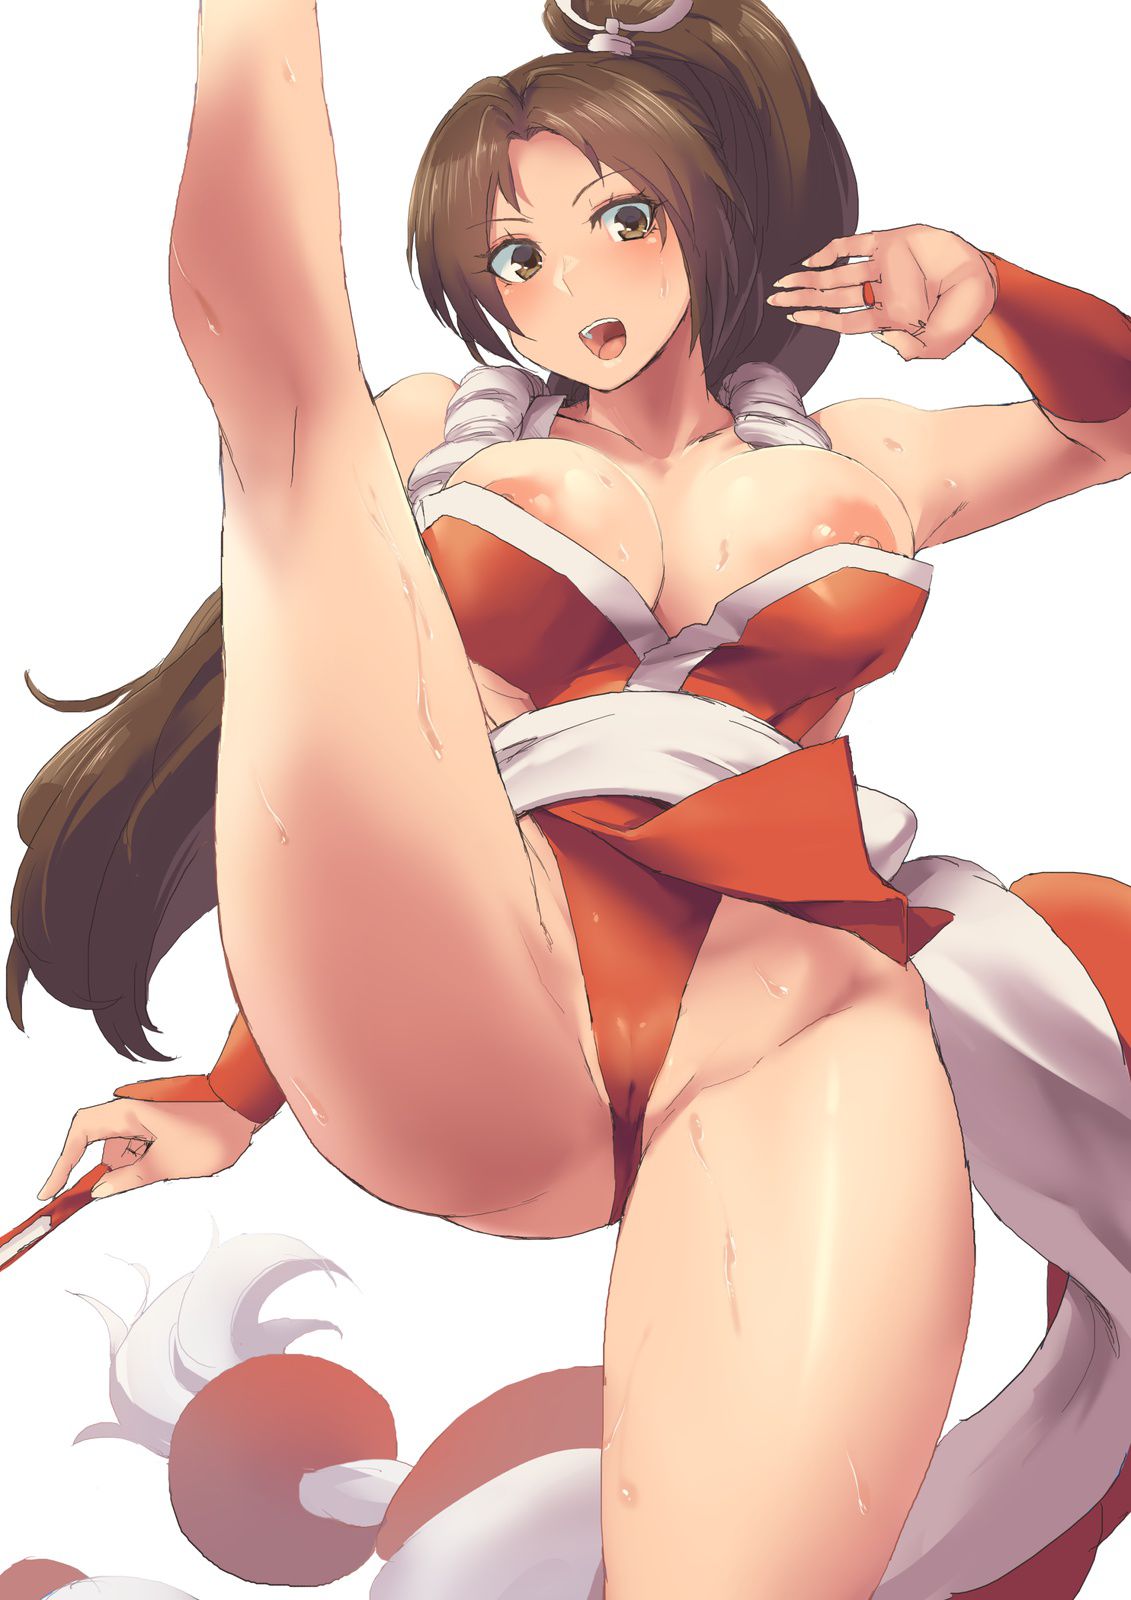 [The King of Fighters] secondary erotic image of Mai Shiranui condemning ah. 9